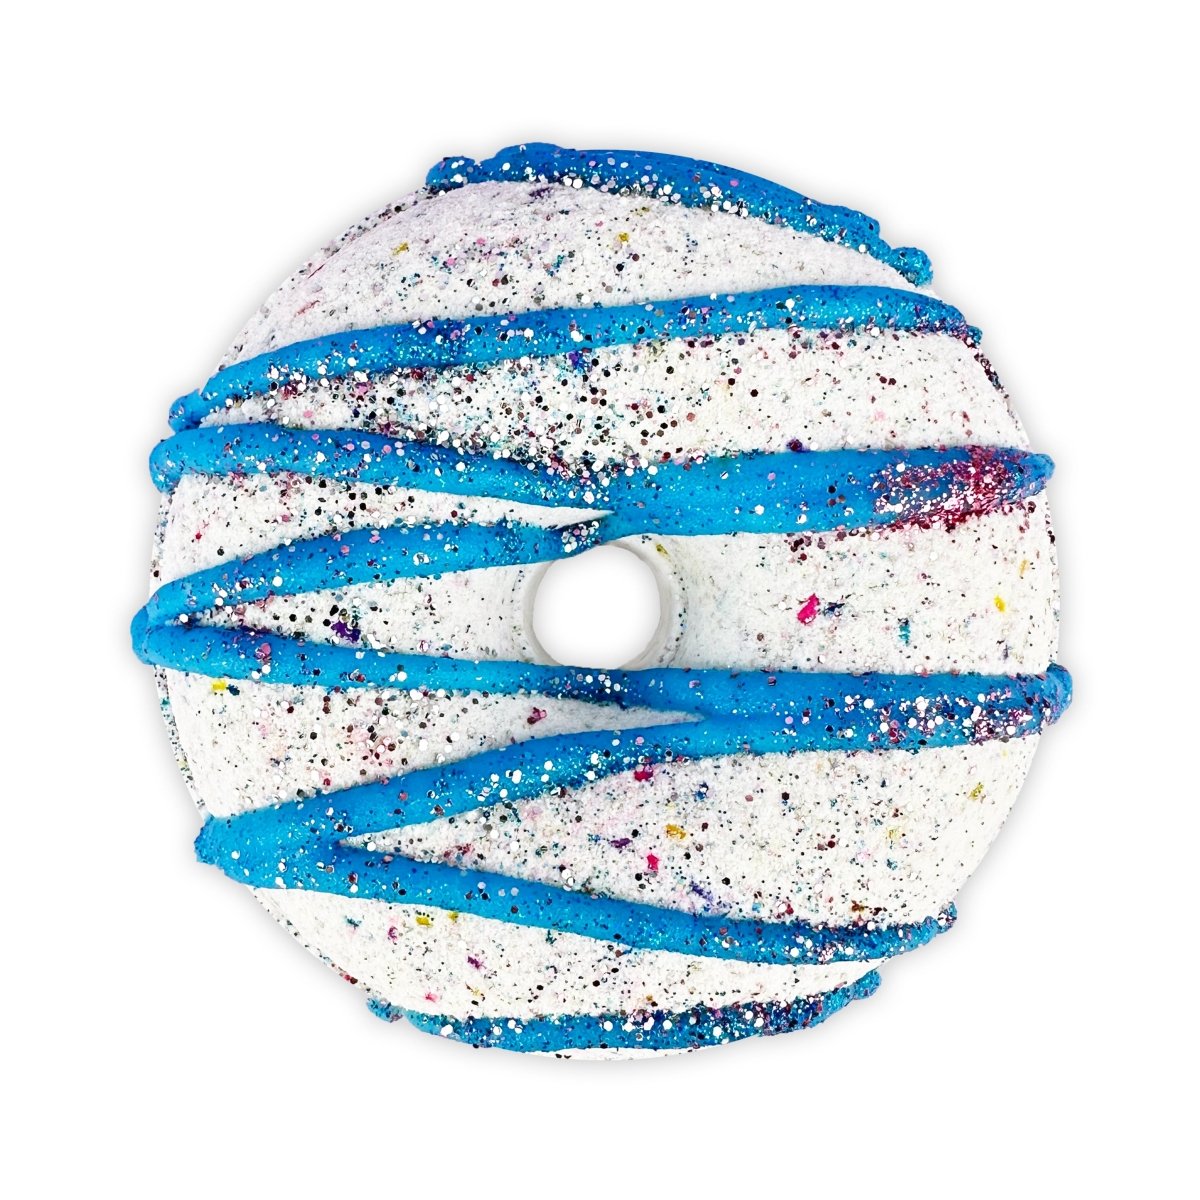 Confetti Donut Bath Bomb for Kids & Adults - Colourful Sprinkles Cookie Dough Fragrance - Made in Australia by Bath Box